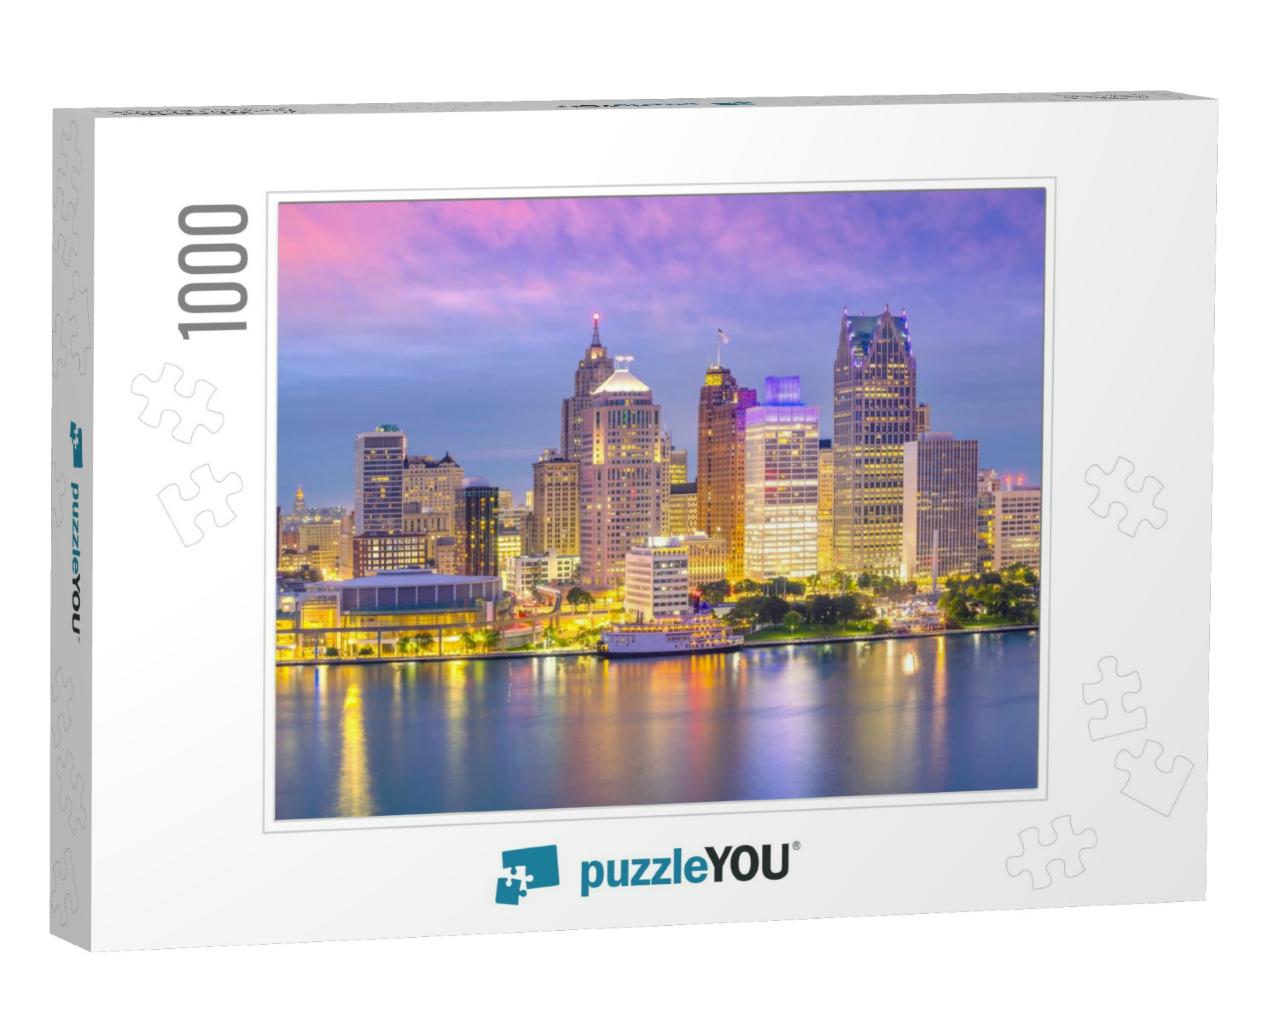 Detroit Skyline in Michigan, USA At Sunset Shot from Winds... Jigsaw Puzzle with 1000 pieces